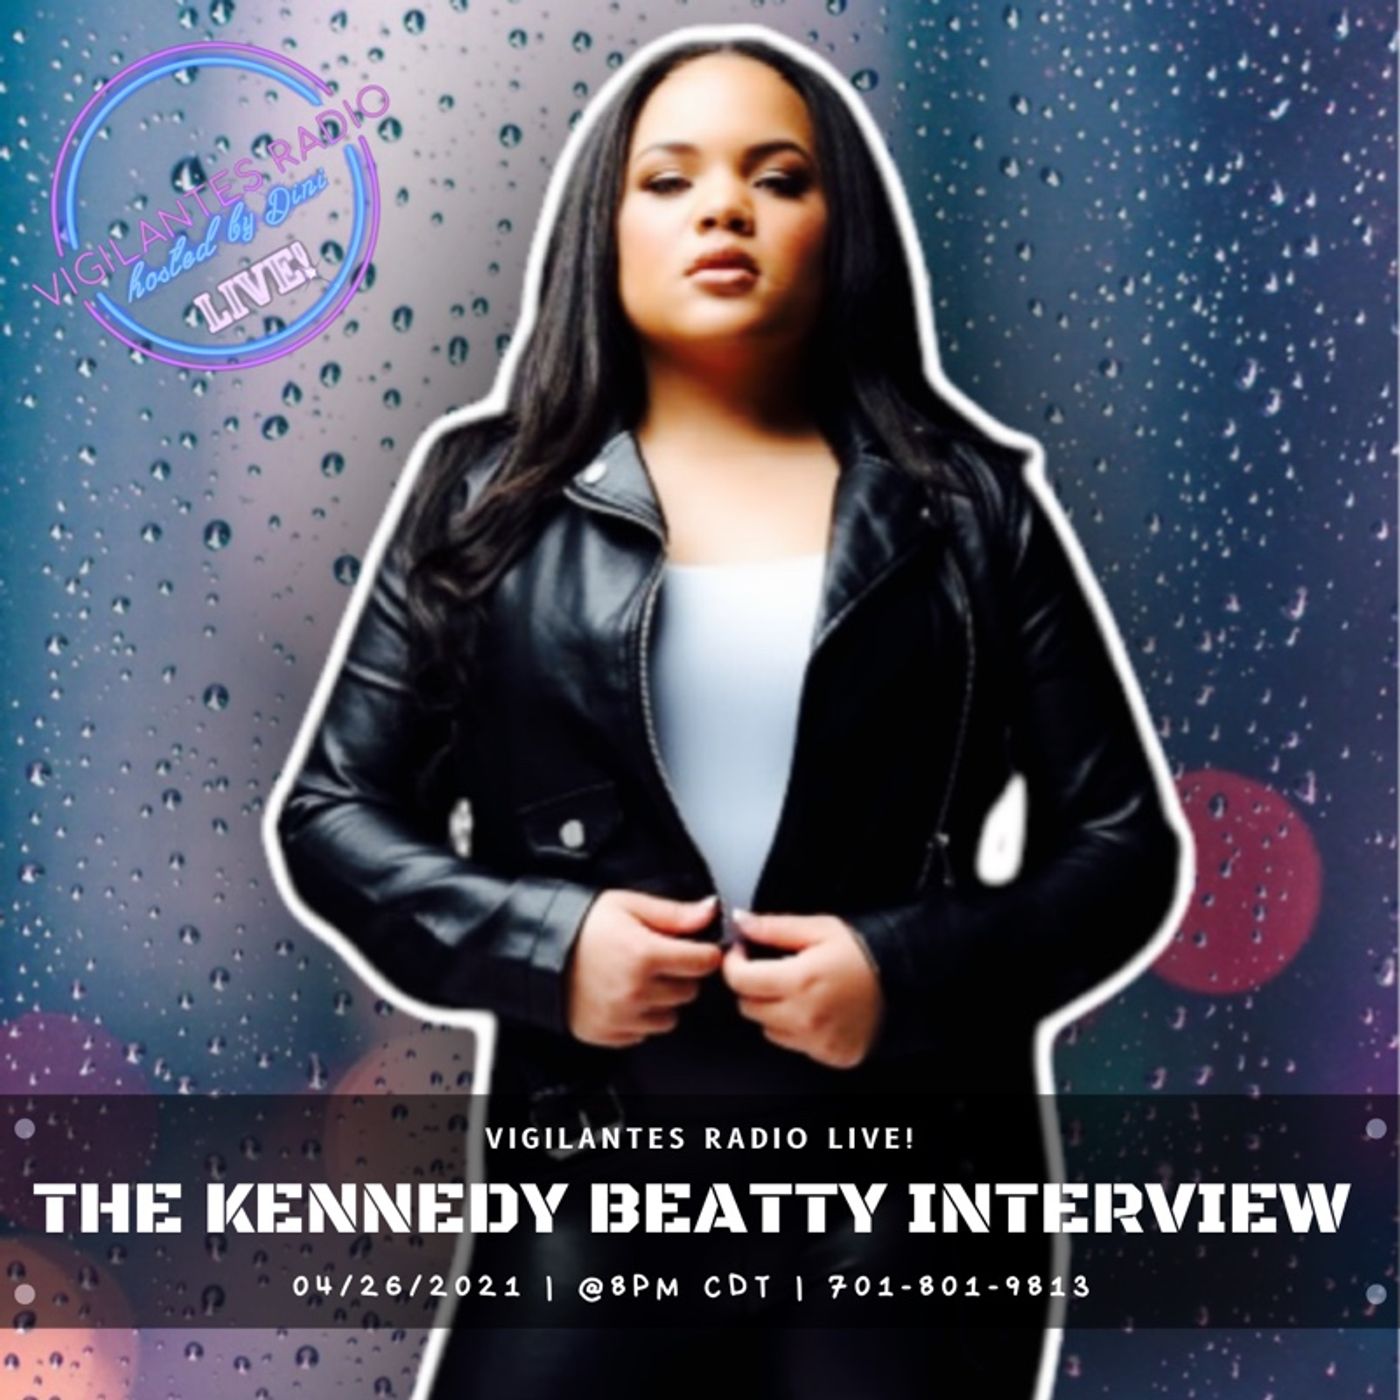 The Kennedy Beatty Interview. Image